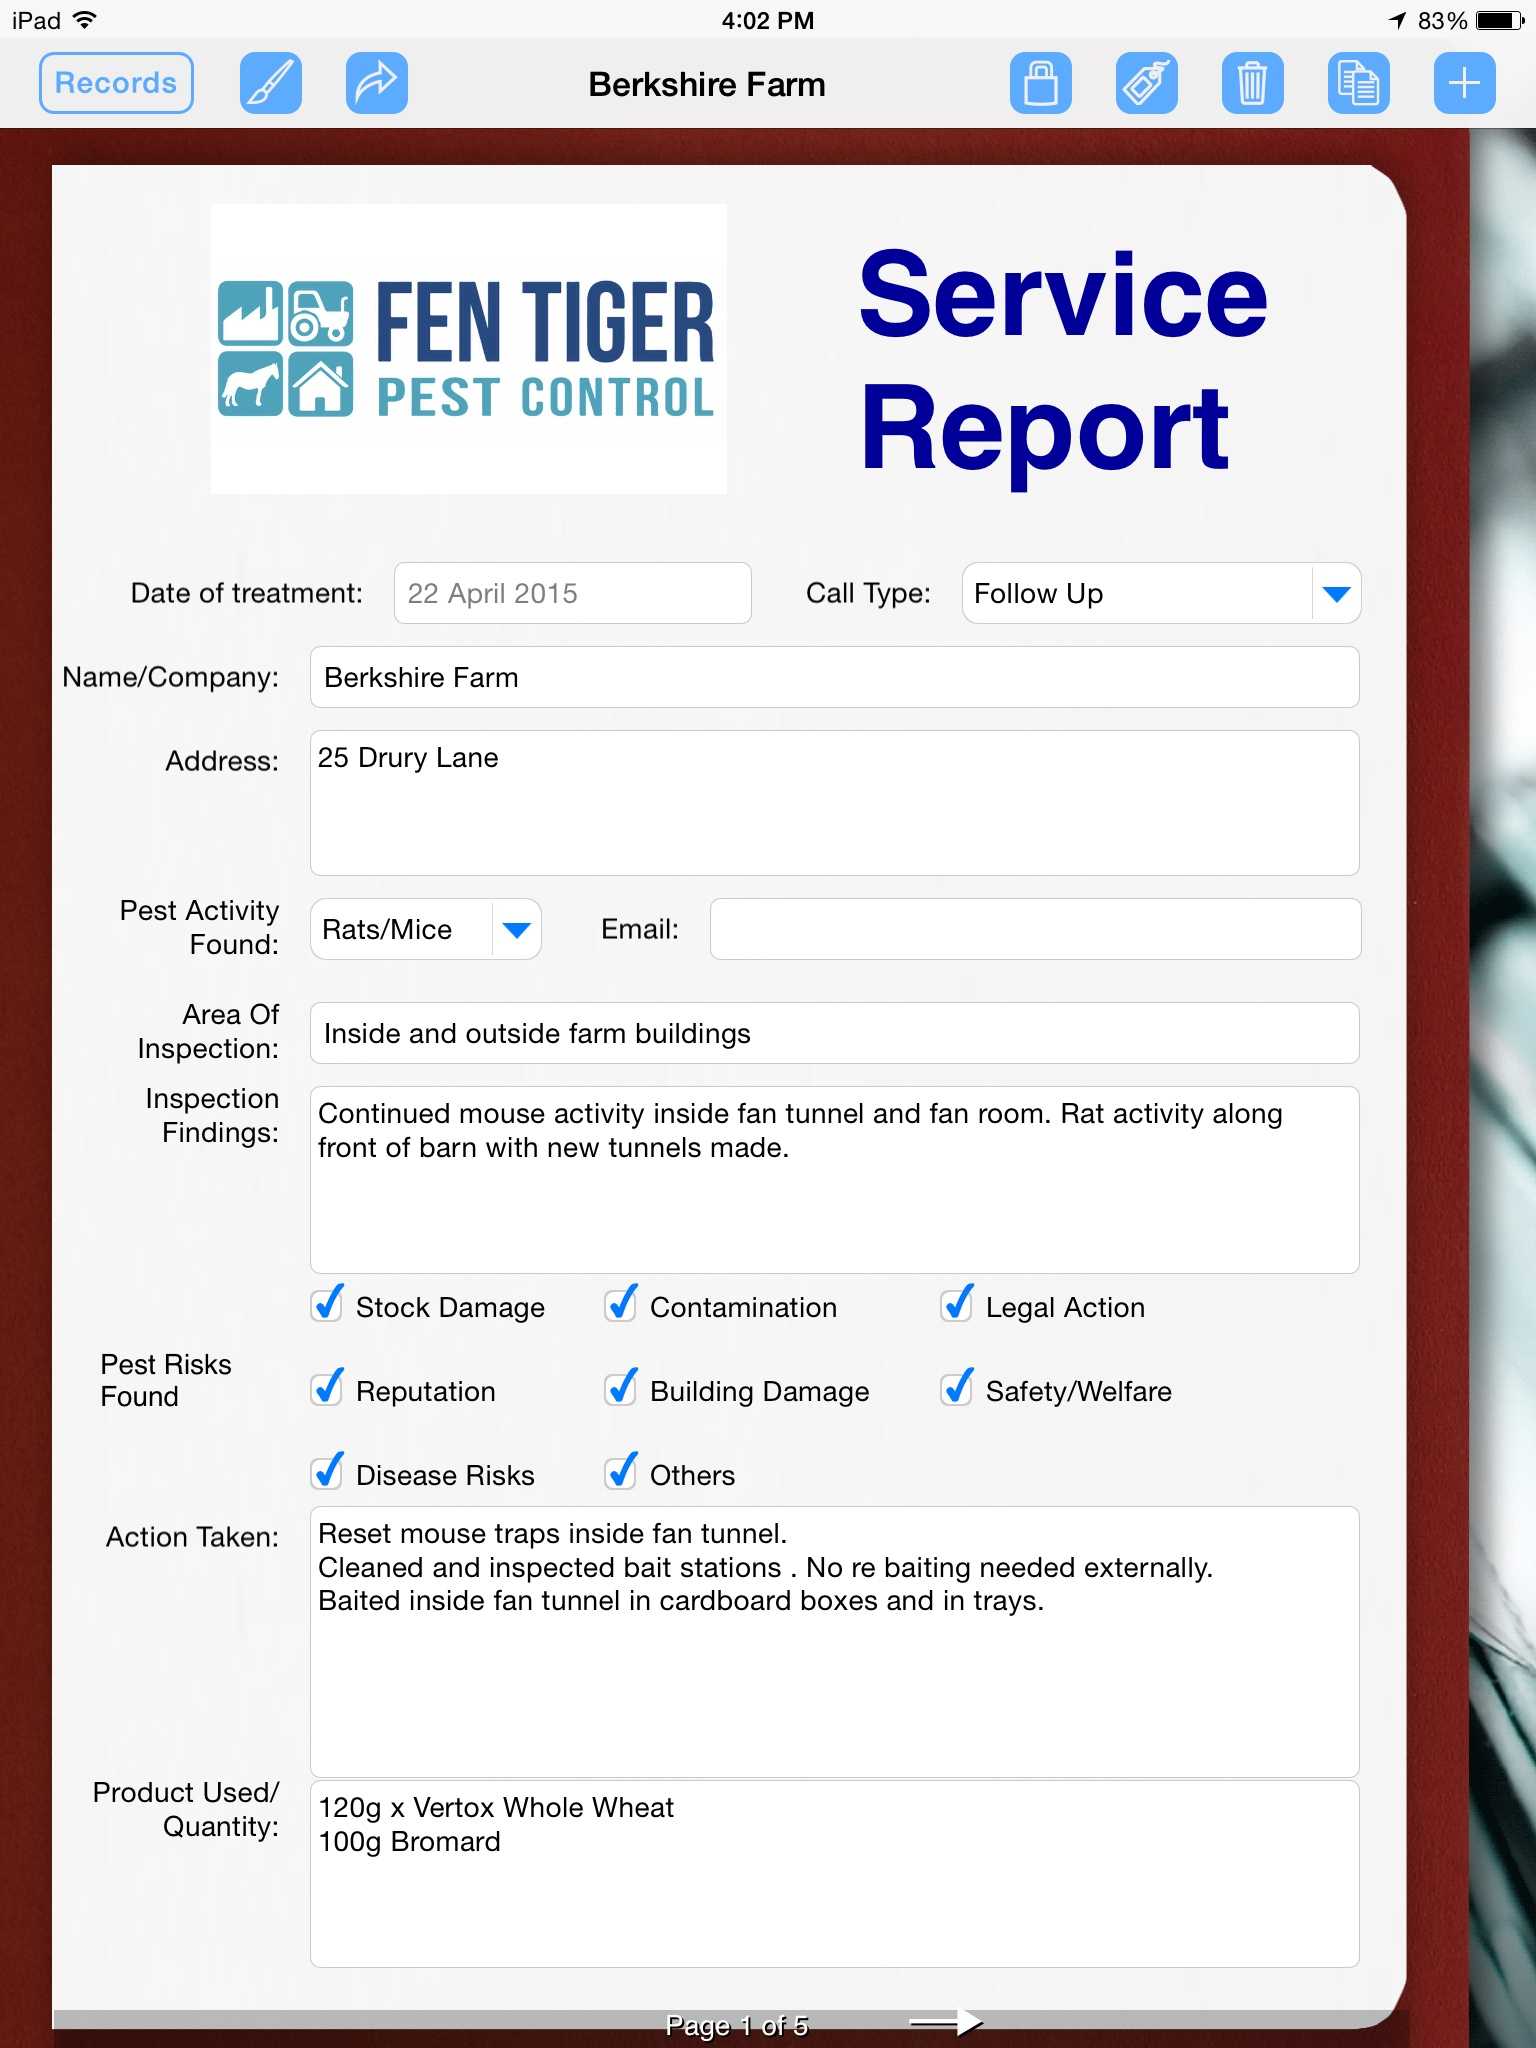 Pest Control Uses Ipad To Prepare Service Report | Form Pertaining To Pest Control Inspection Report Template